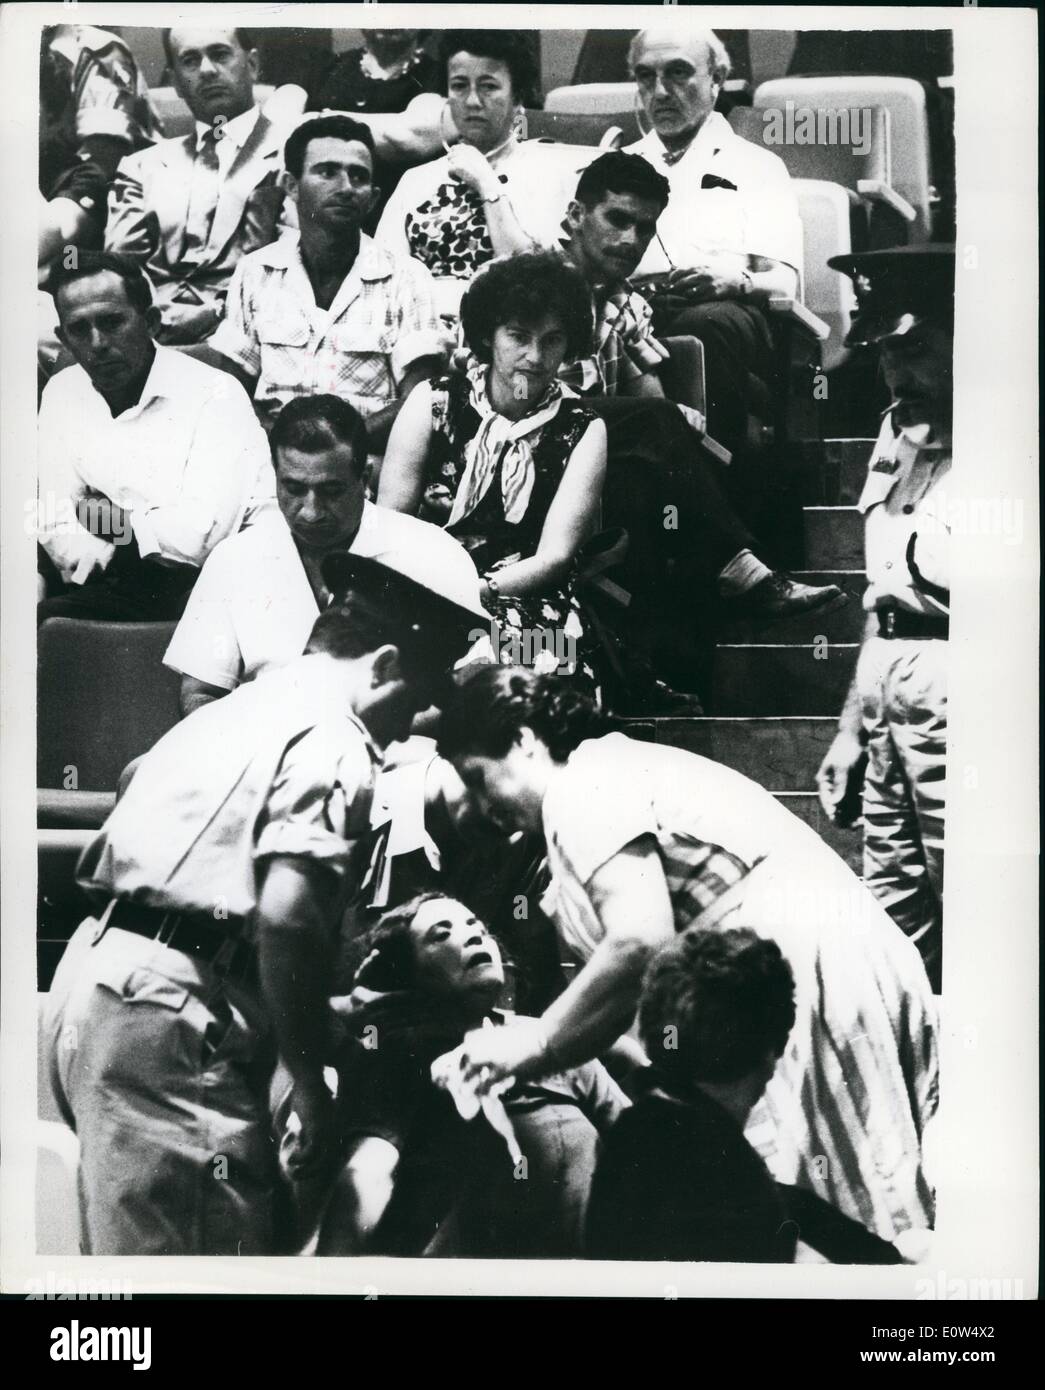 May 05, 1961 - Trial of Adolf Eichmann continues in Jerusalem.: The trial of Adolf Eichmann - former Nazi leader - accused of the murder of millions of Jews in Wartime Concentration Camps - continues in Jerusalem. Photo shows a woman faints at the Eichmann trial - as horrifying documents and read and submitted to the court. The spectators are said to be exceedingly self-controlled - despite the fact that almost every one of them has lost members of their family - in the Concentration camps of Germany and other parts of Europe. Stock Photo